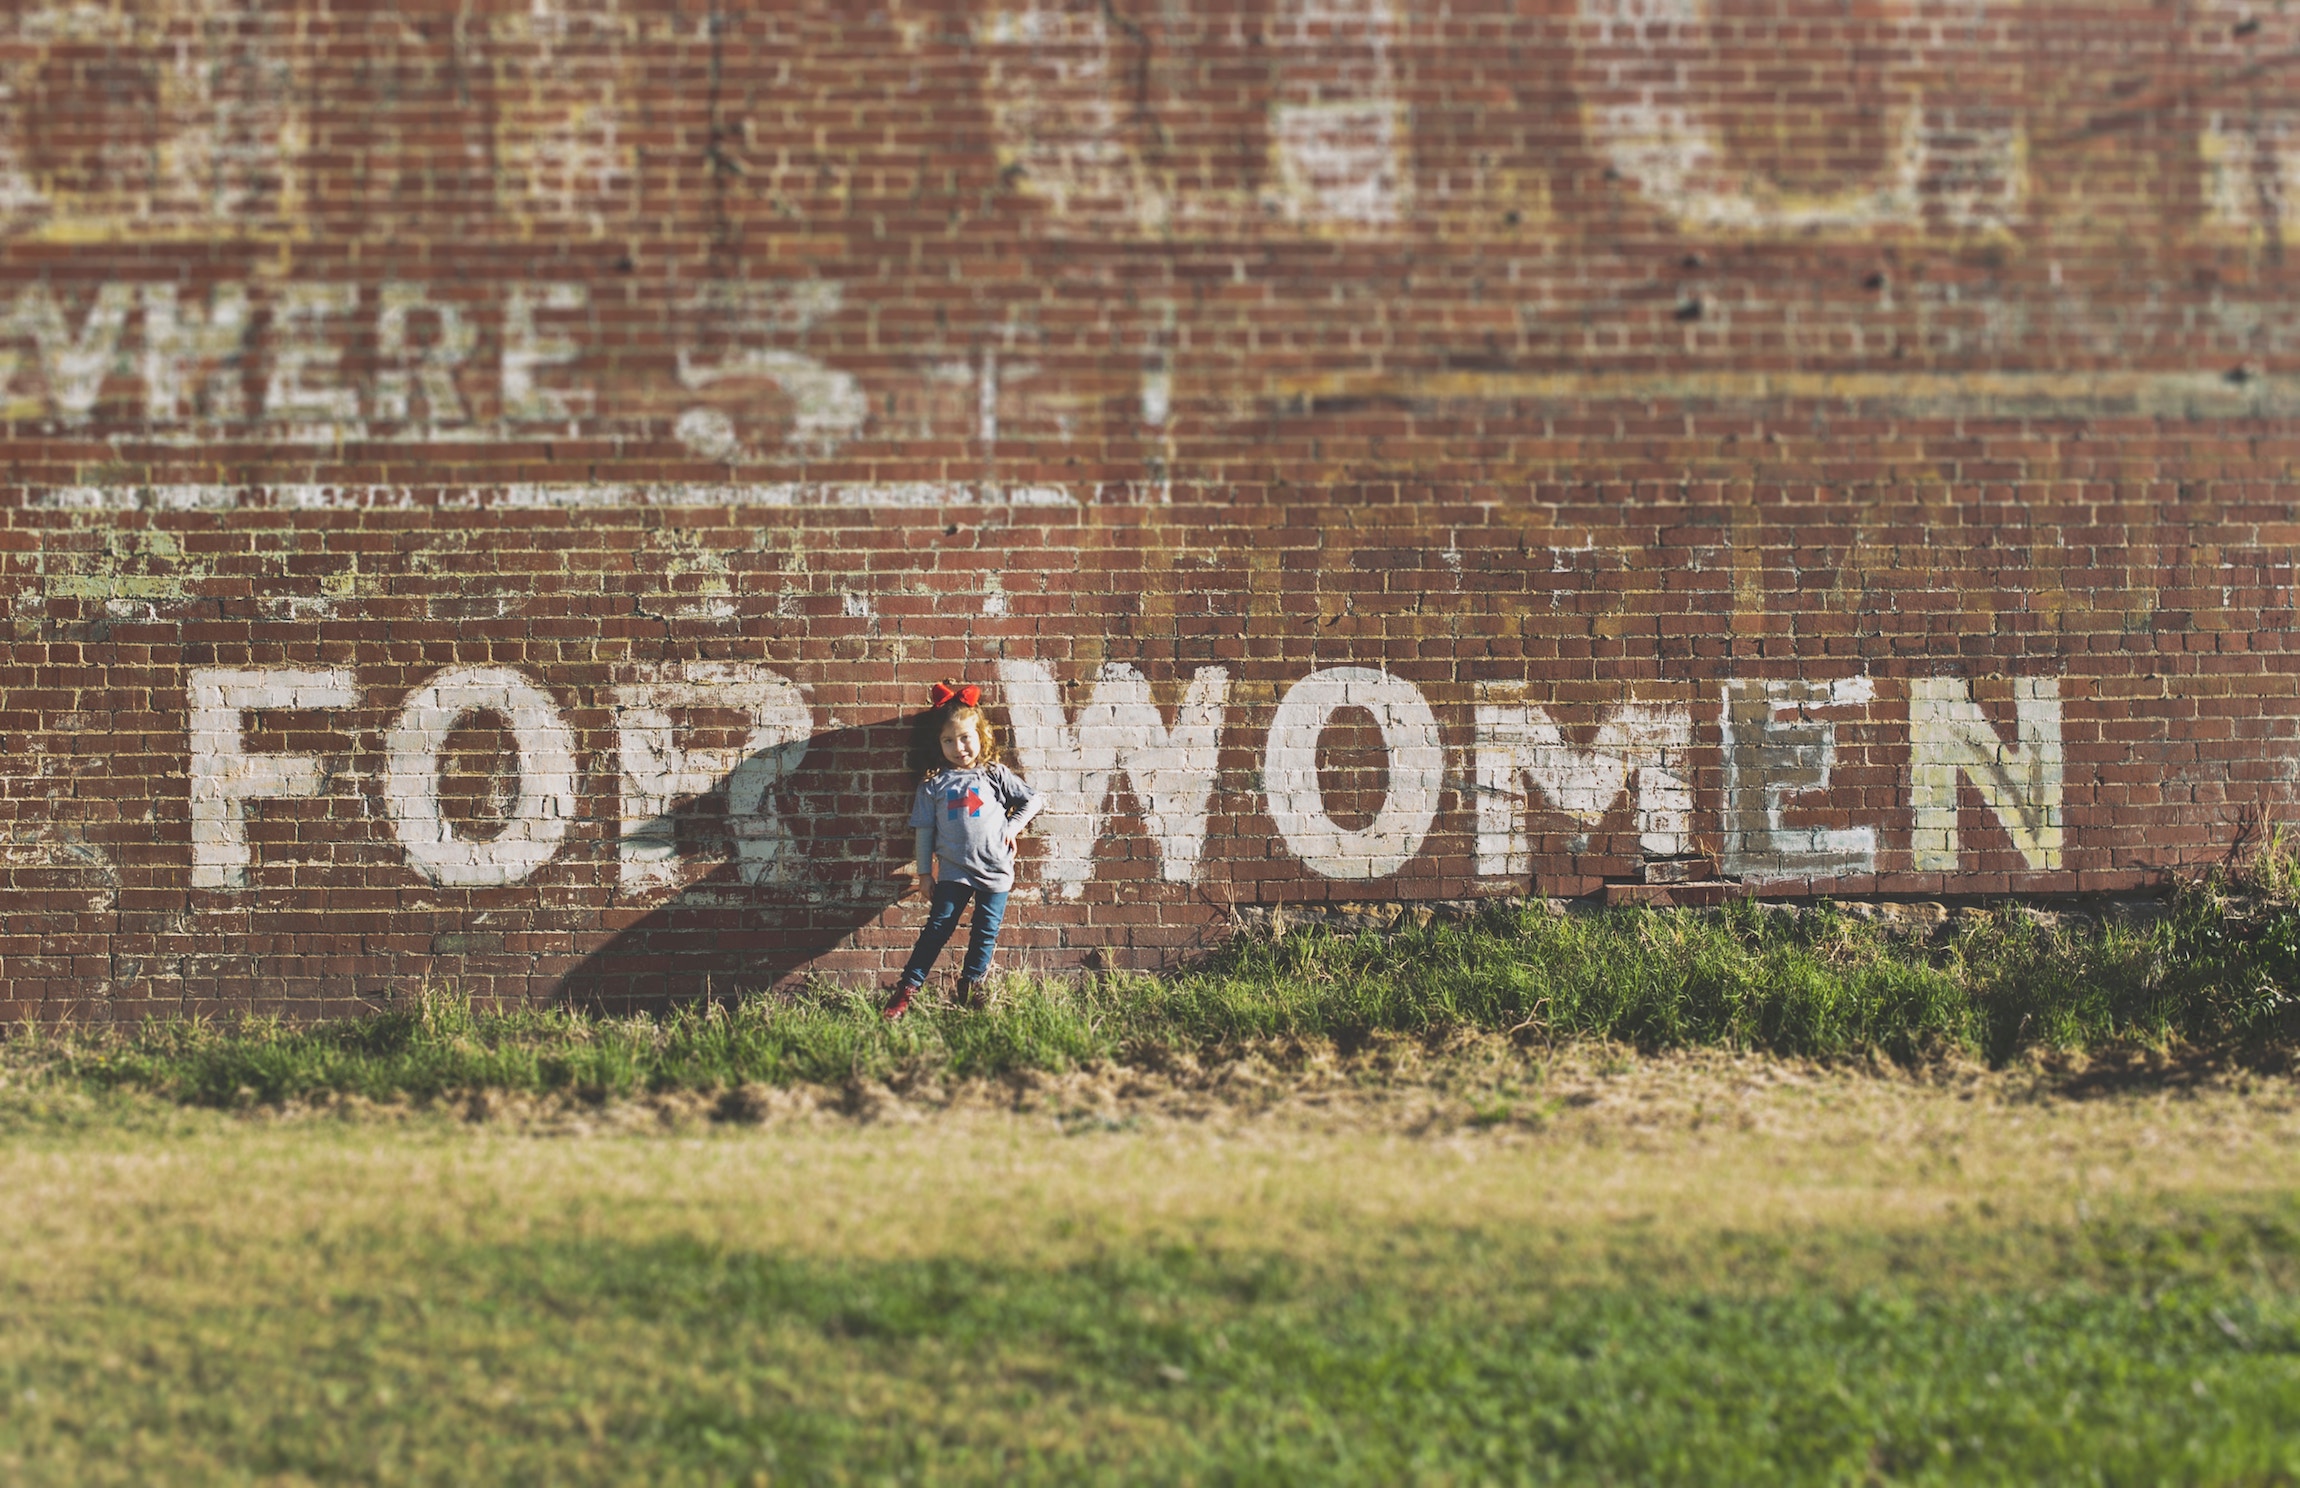 Little girl in front of brick wall that says "for women"